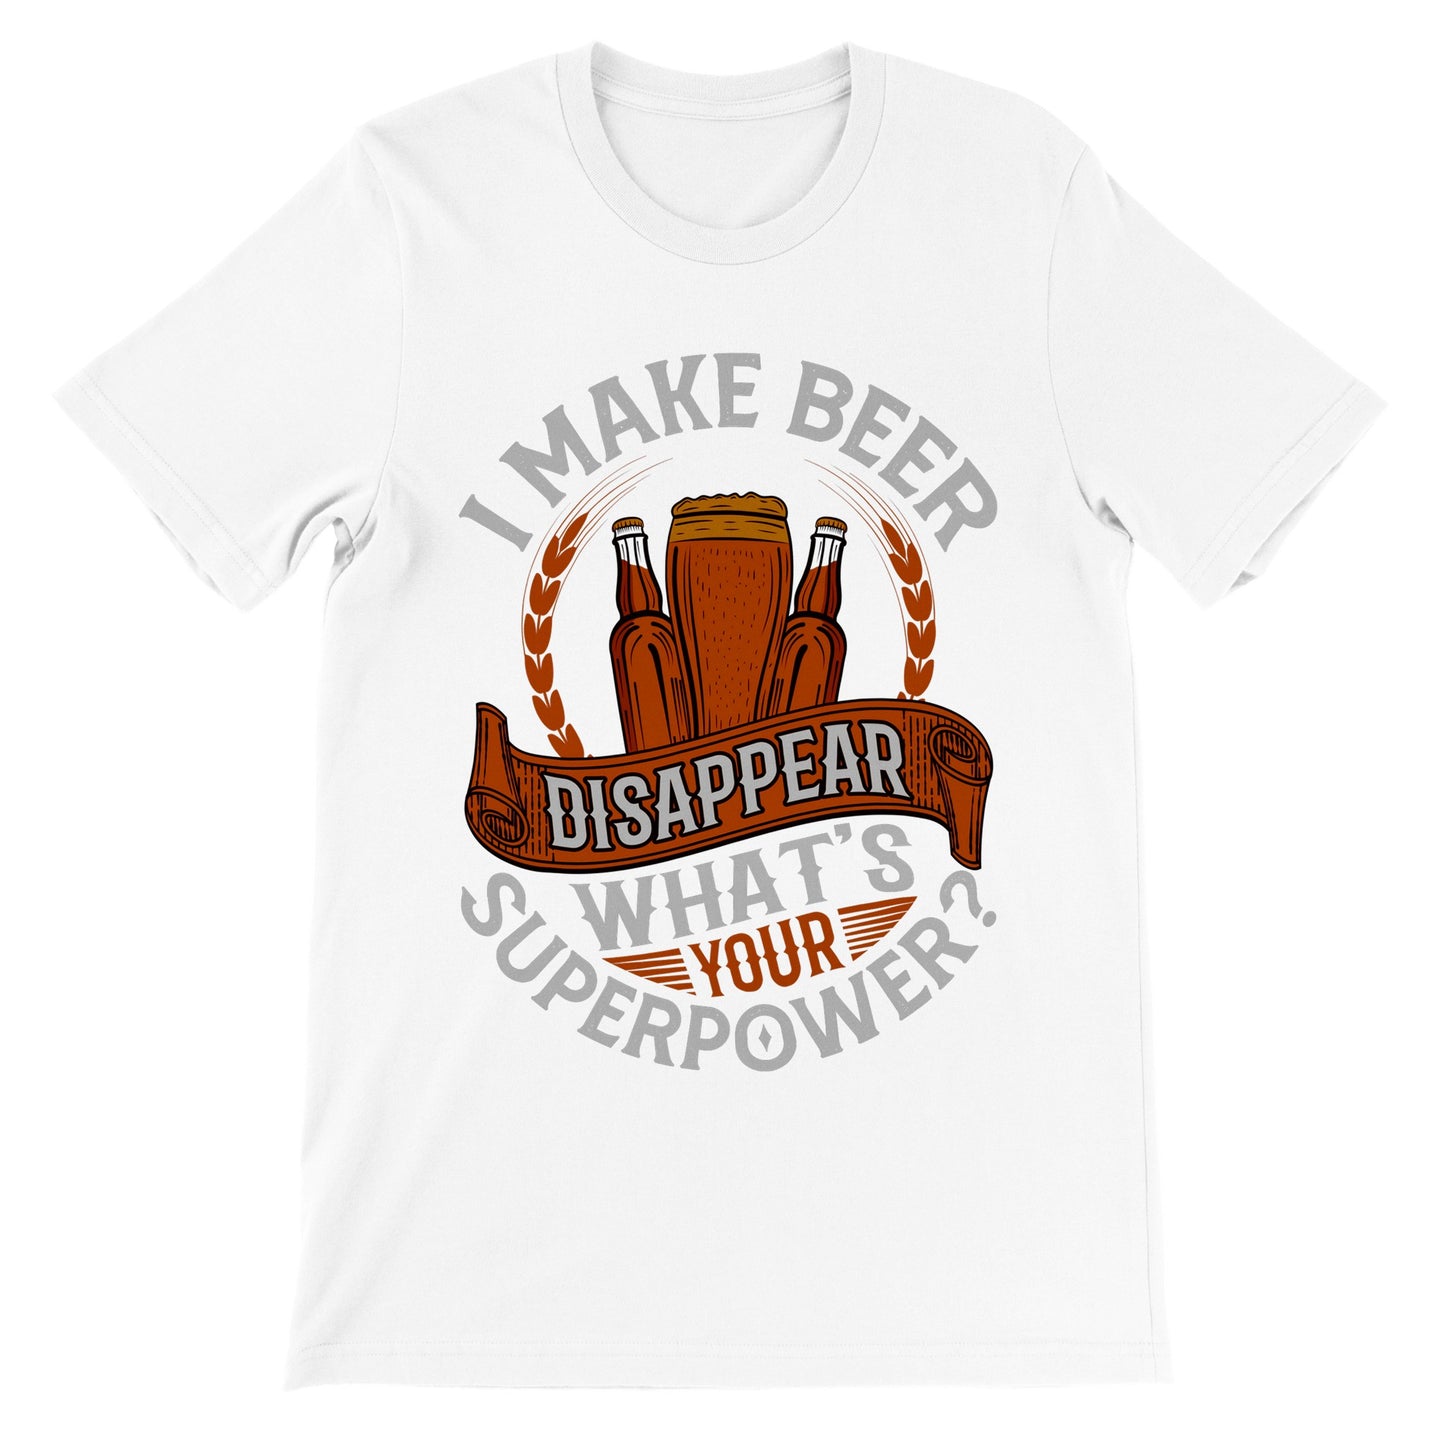 Sjove T-shirt - I Make Beer Disappea, Whats Your Superpower - Premium T-shirt